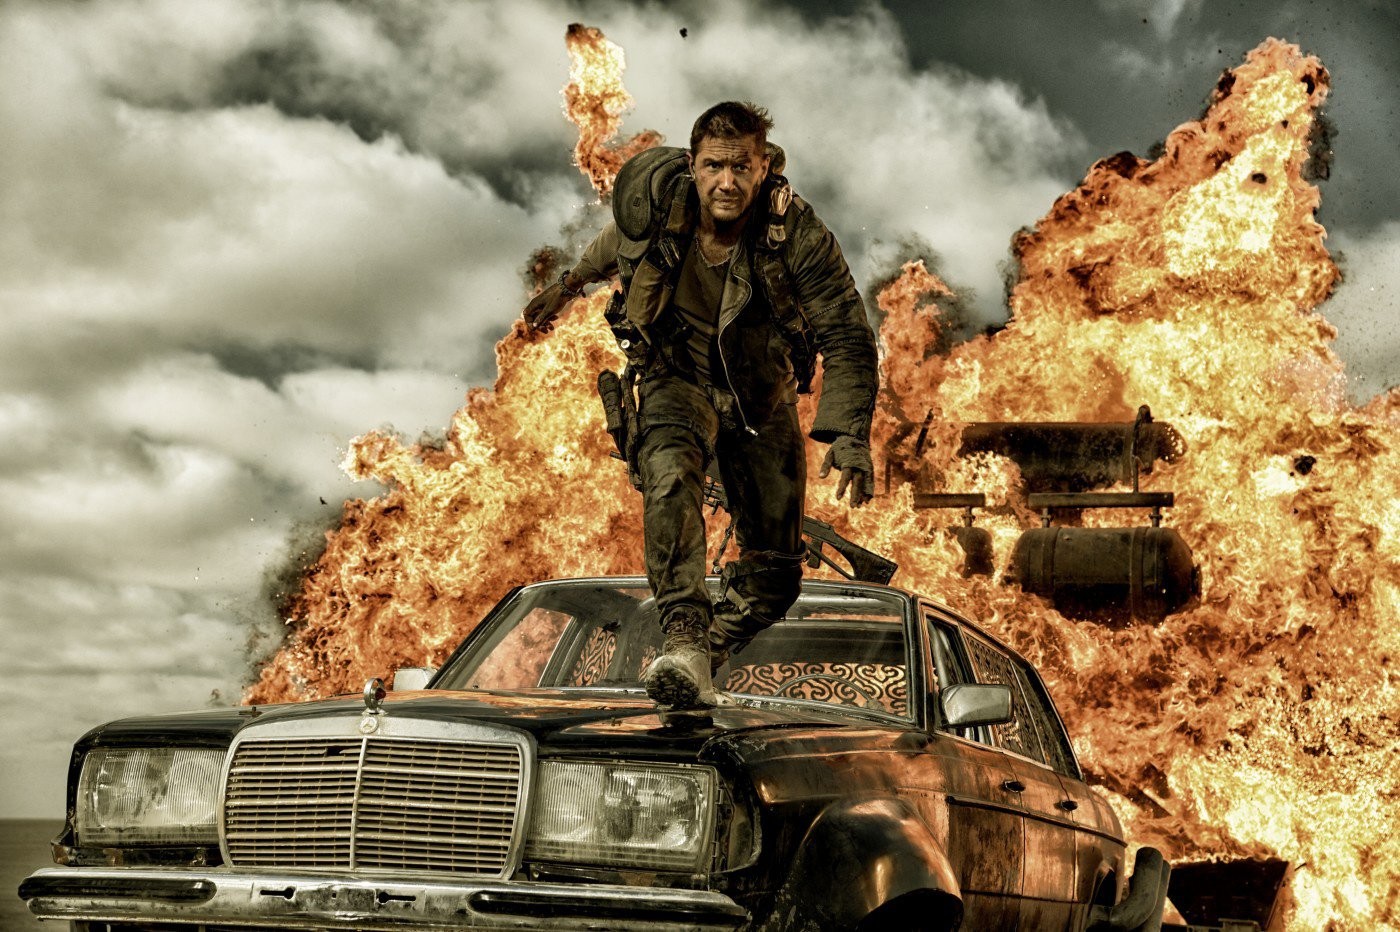 Tom Hardy stars as Max Rockatansky in Warner Bros. Pictures' Mad Max: Fury Road (2015). Photo credit by Jasin Boland.